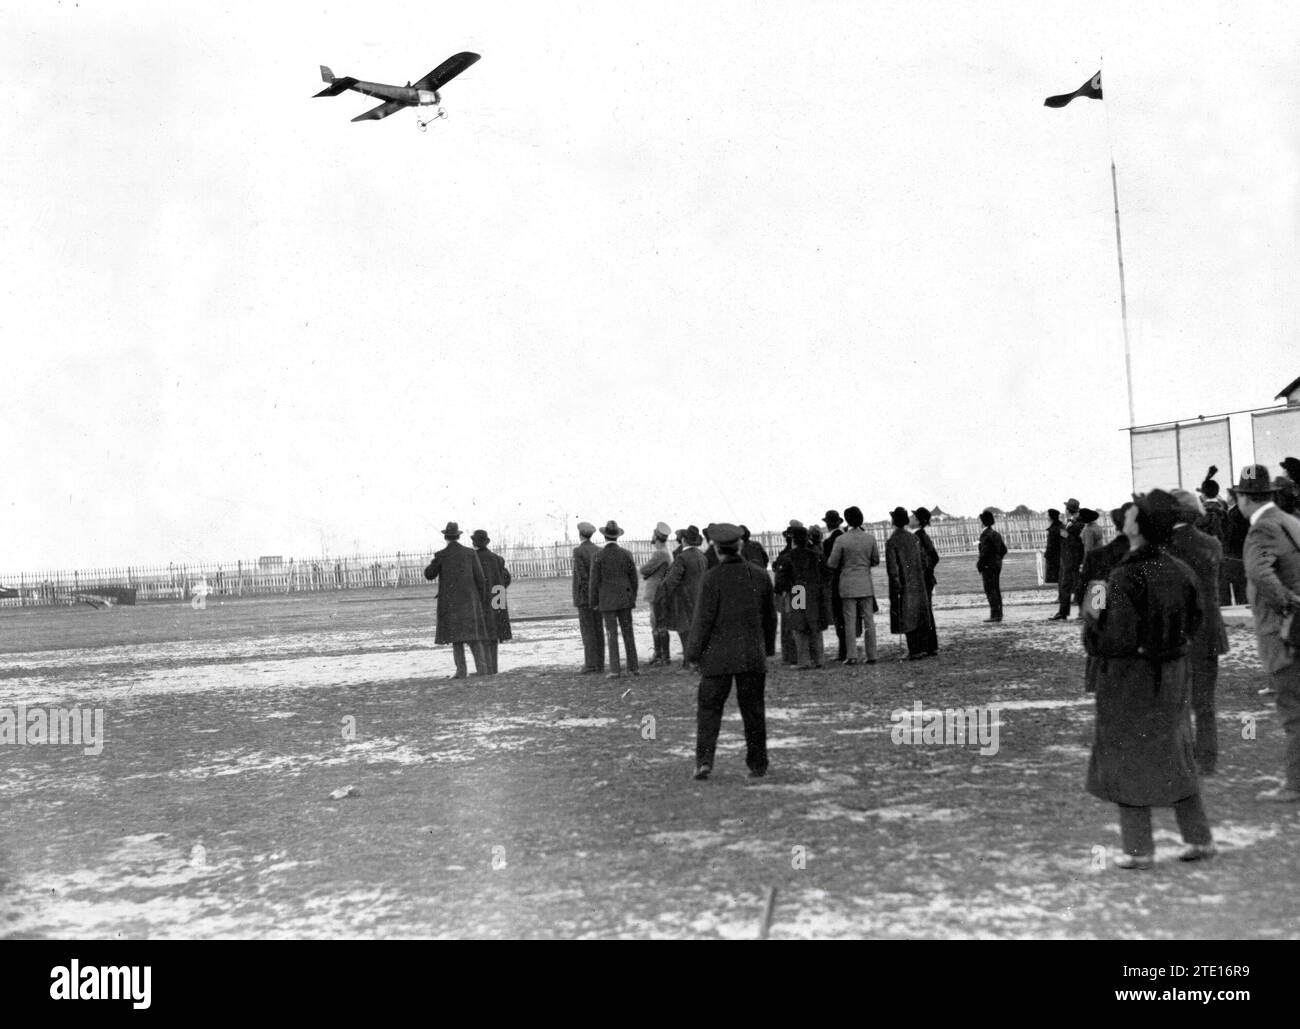 03/07/1914 at Getafe airport. The Minister of Development and Other Personalities Witnessing the Arrival of the aviator Mr. Adaro, from Guadalajara. Credit: Album / Archivo ABC / Ramón Alba Stock Photo